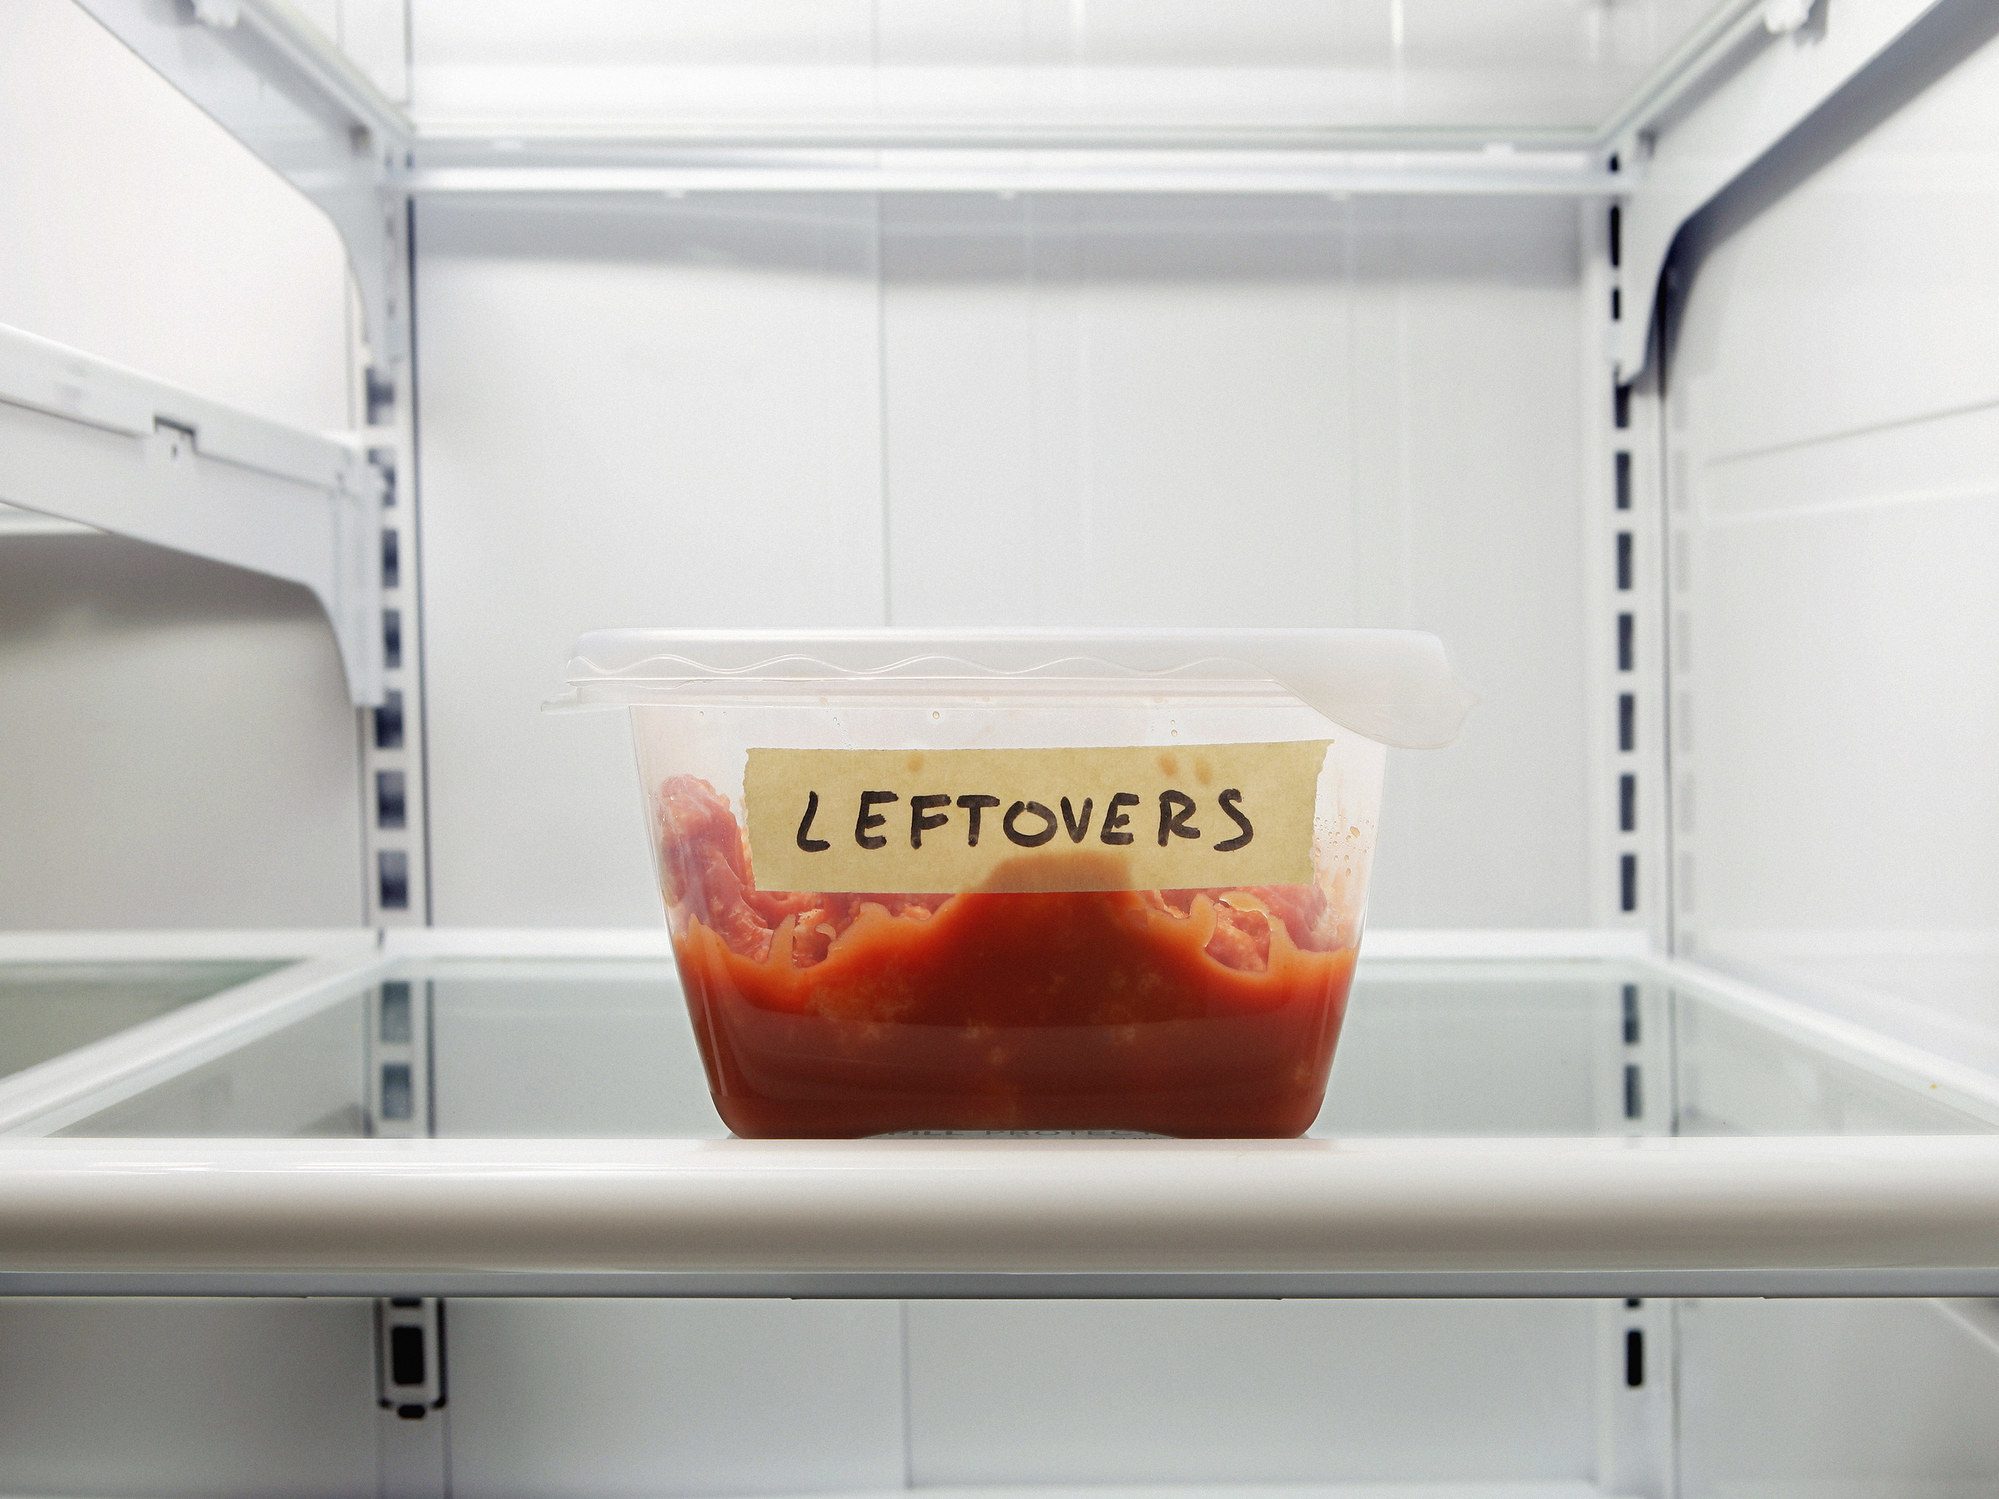 A container of leftovers on an otherwise empty fridge shelf